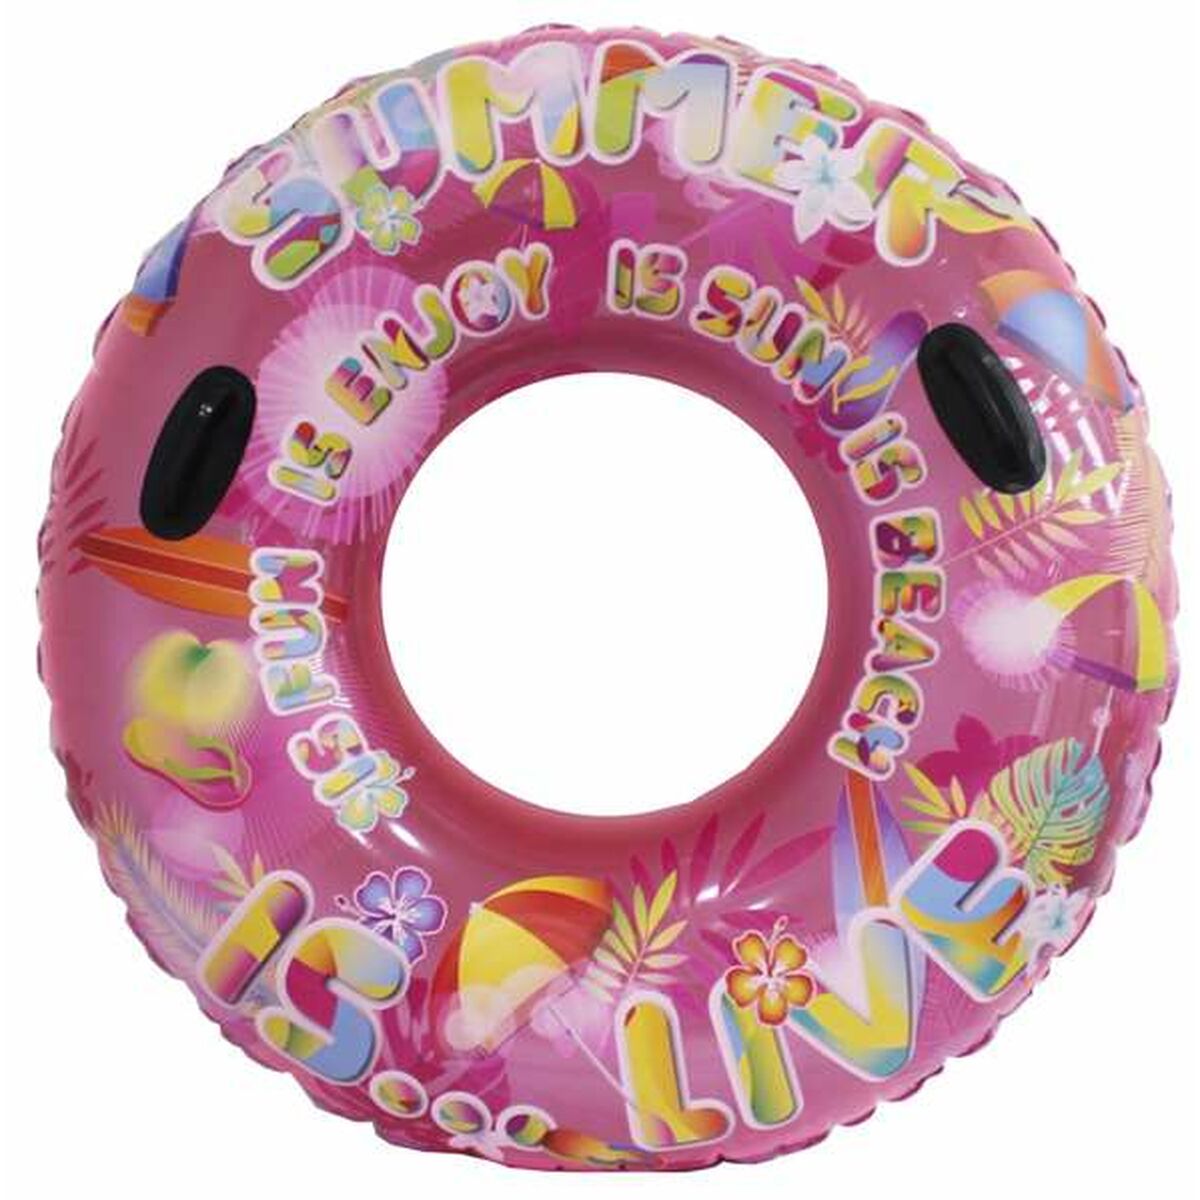 Inflatable Floating Doughnut The summer is fun 115 cm